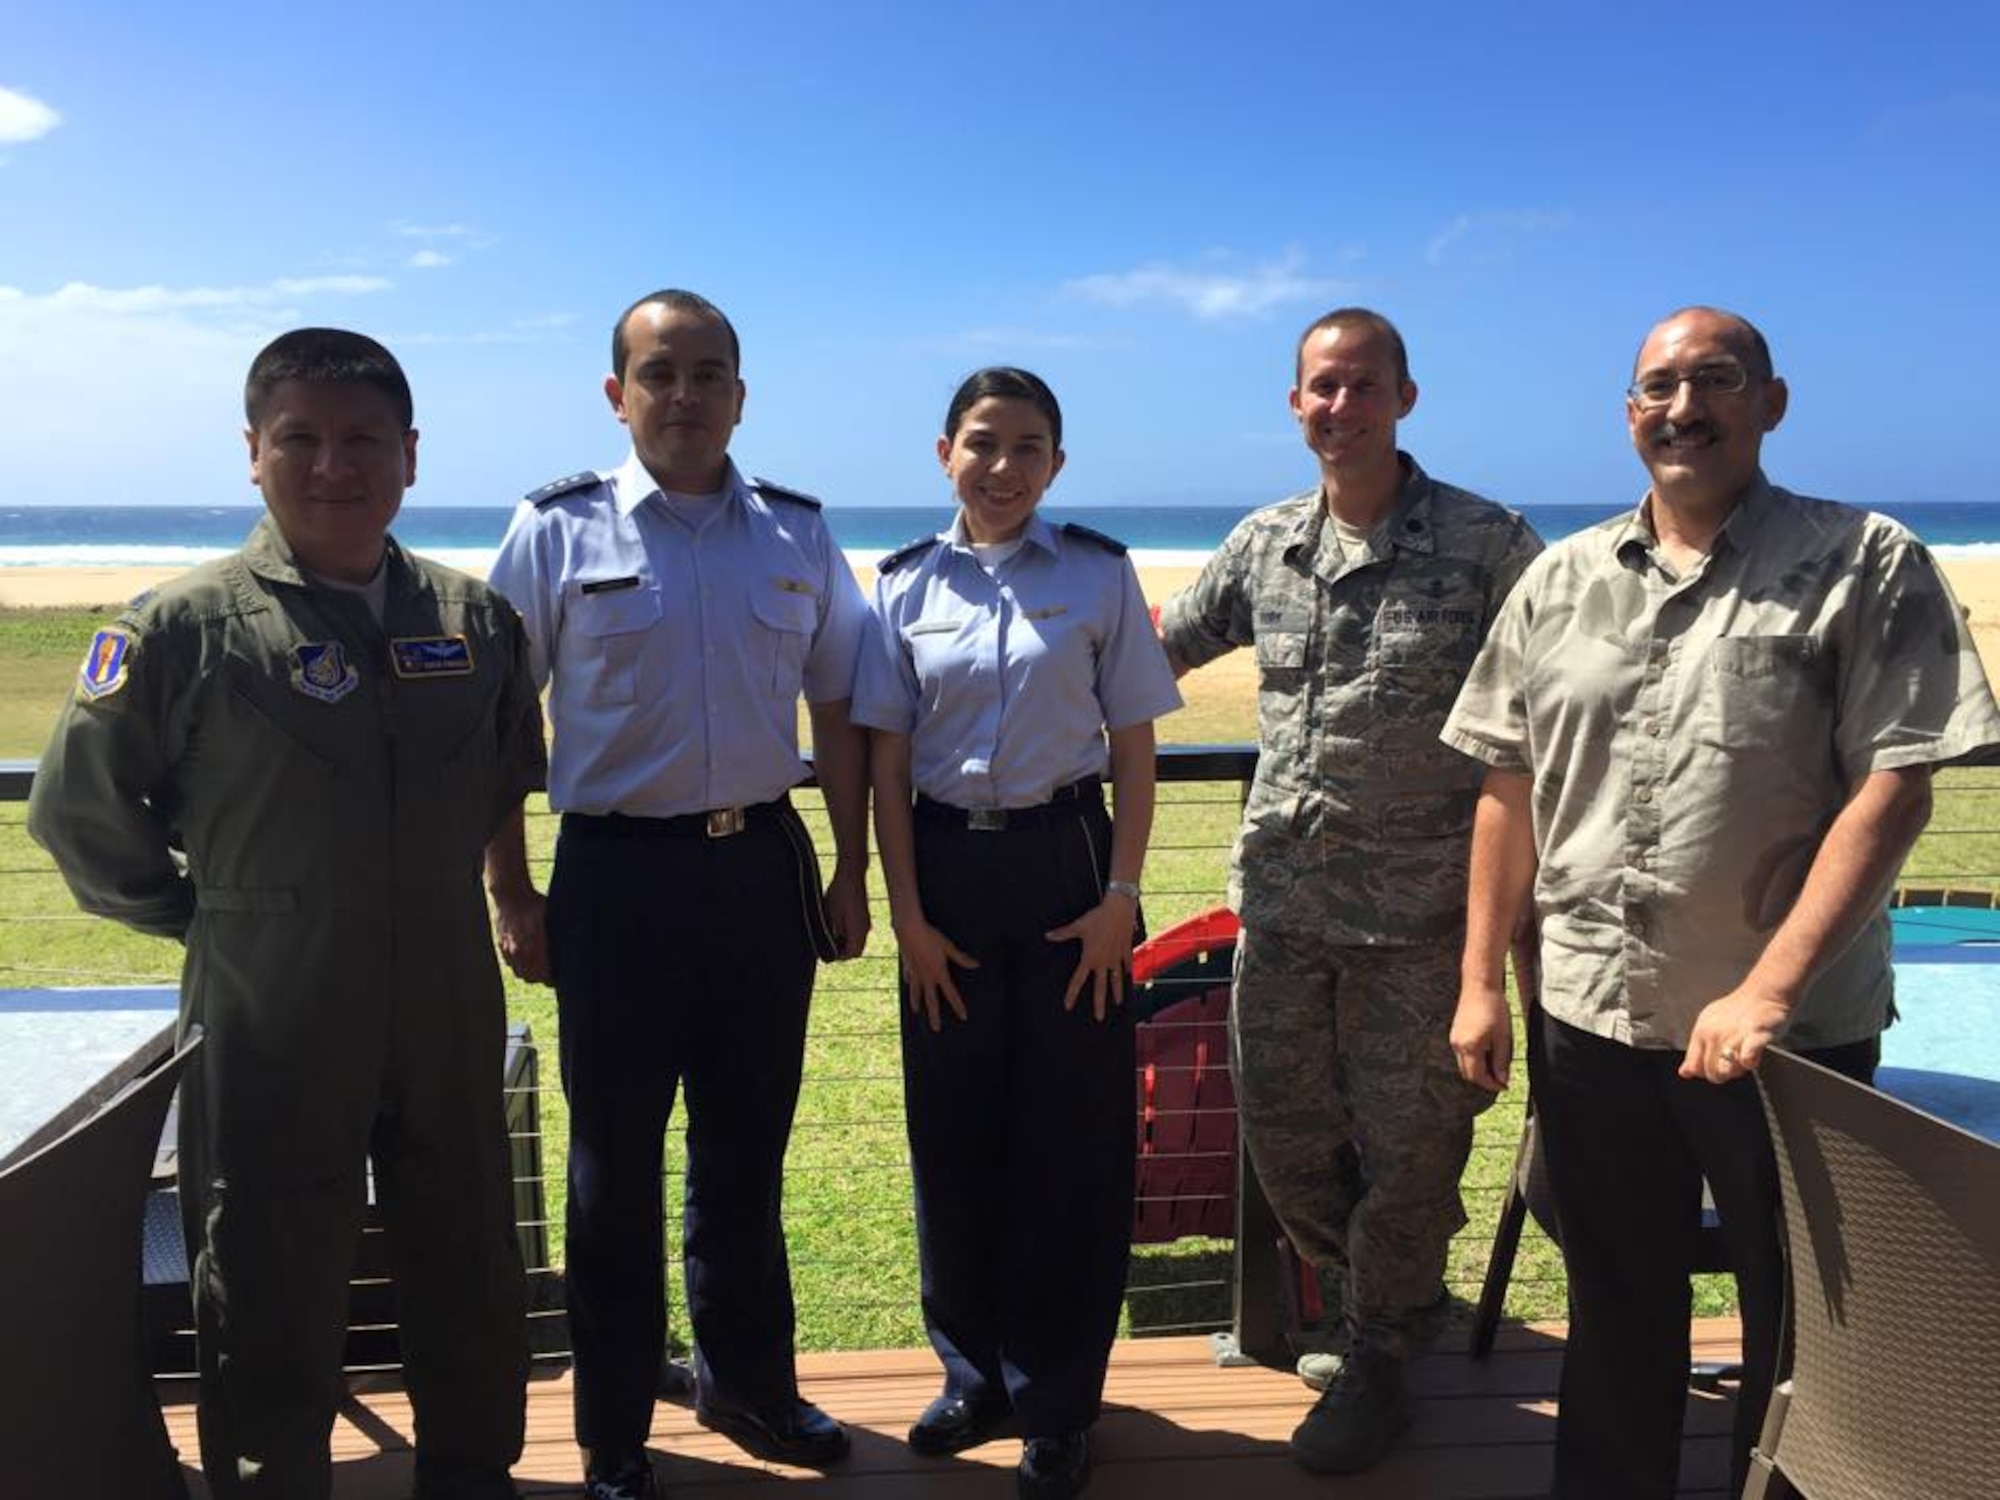 (From left) U.S. Air Force Lt. Col. Erick Fonseca, Colombian air force Capitans Fabio Sandoval and Andrea Correchea, Lt. Col. Trae York and XXXXXXXXX from the whatever, pose for a photo near the beach in Hawaii during the Colombian space familiarization trip in February. (Courtesy photo) 